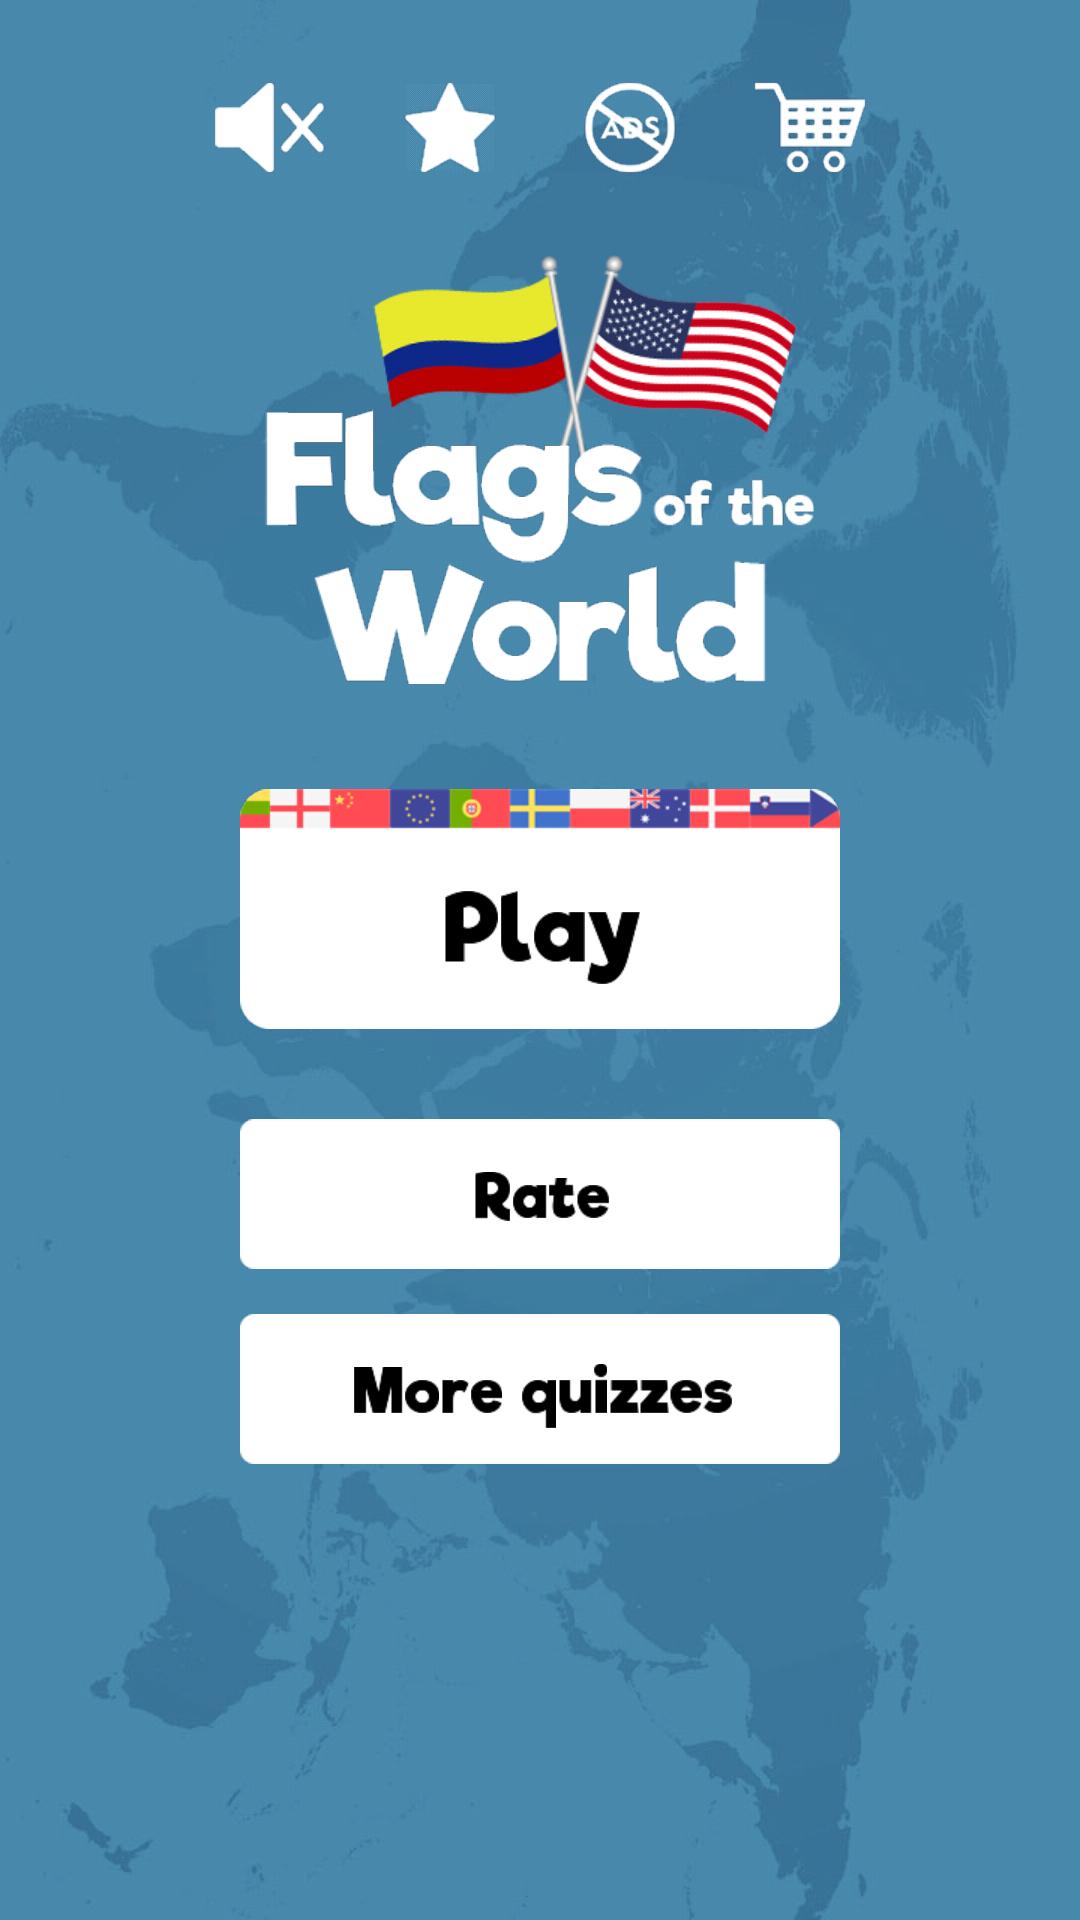 World Flags Quiz - Guess The Country Flag! for Android - APK Download